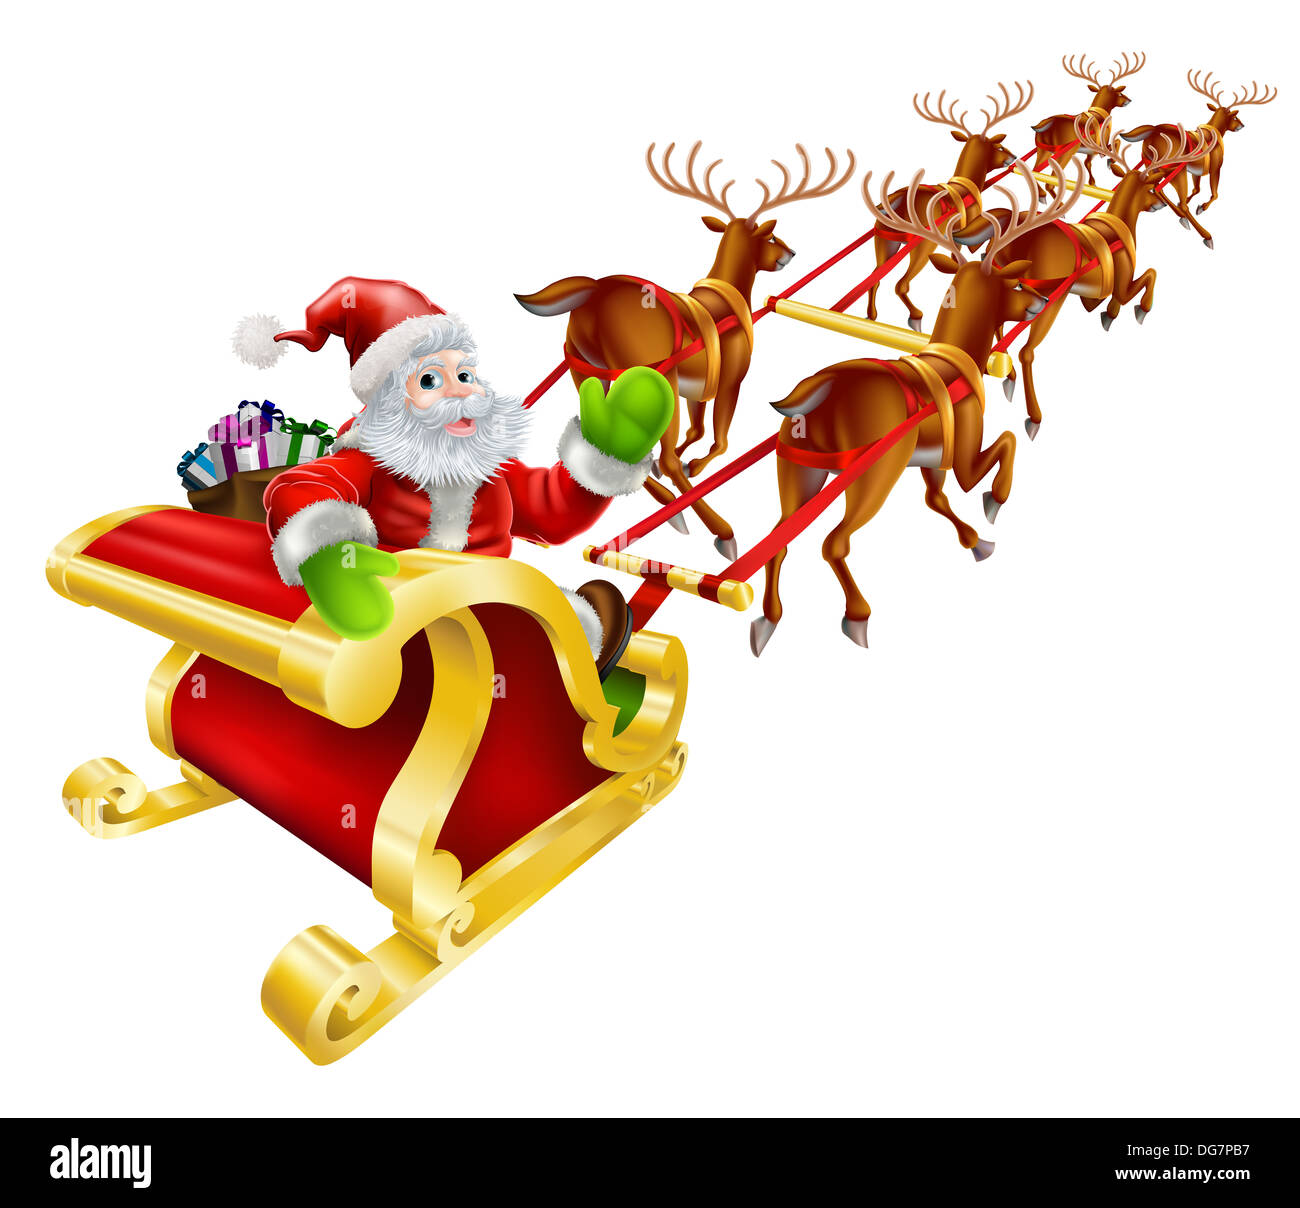 Christmas illustration of Cartoon Santa Claus flying in his sled or sleigh and waving Stock Photo